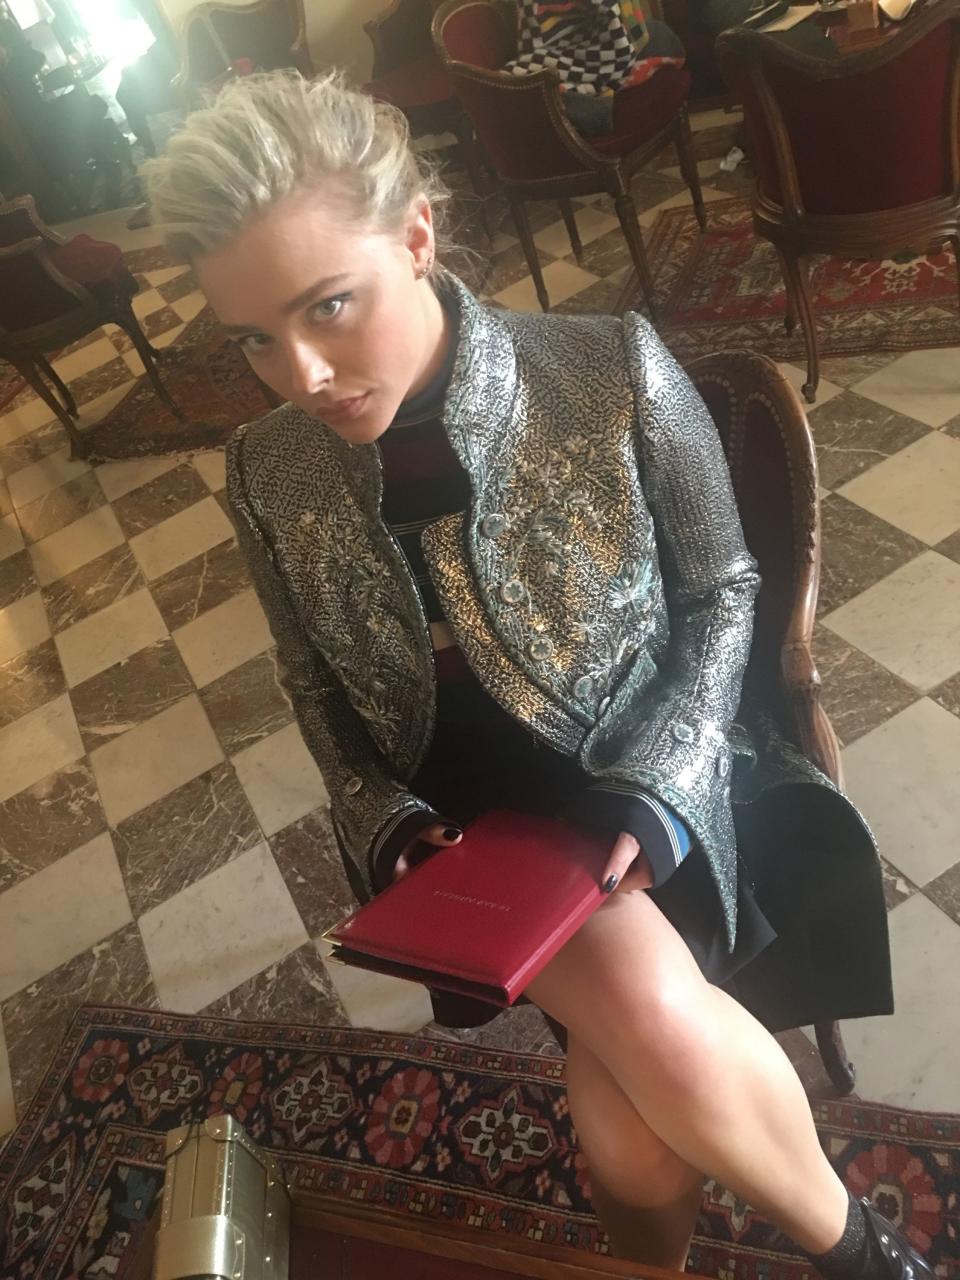 The actress shared snapshots from her Parisian Fashion Week adventures, including selfies with some fellow celebs.